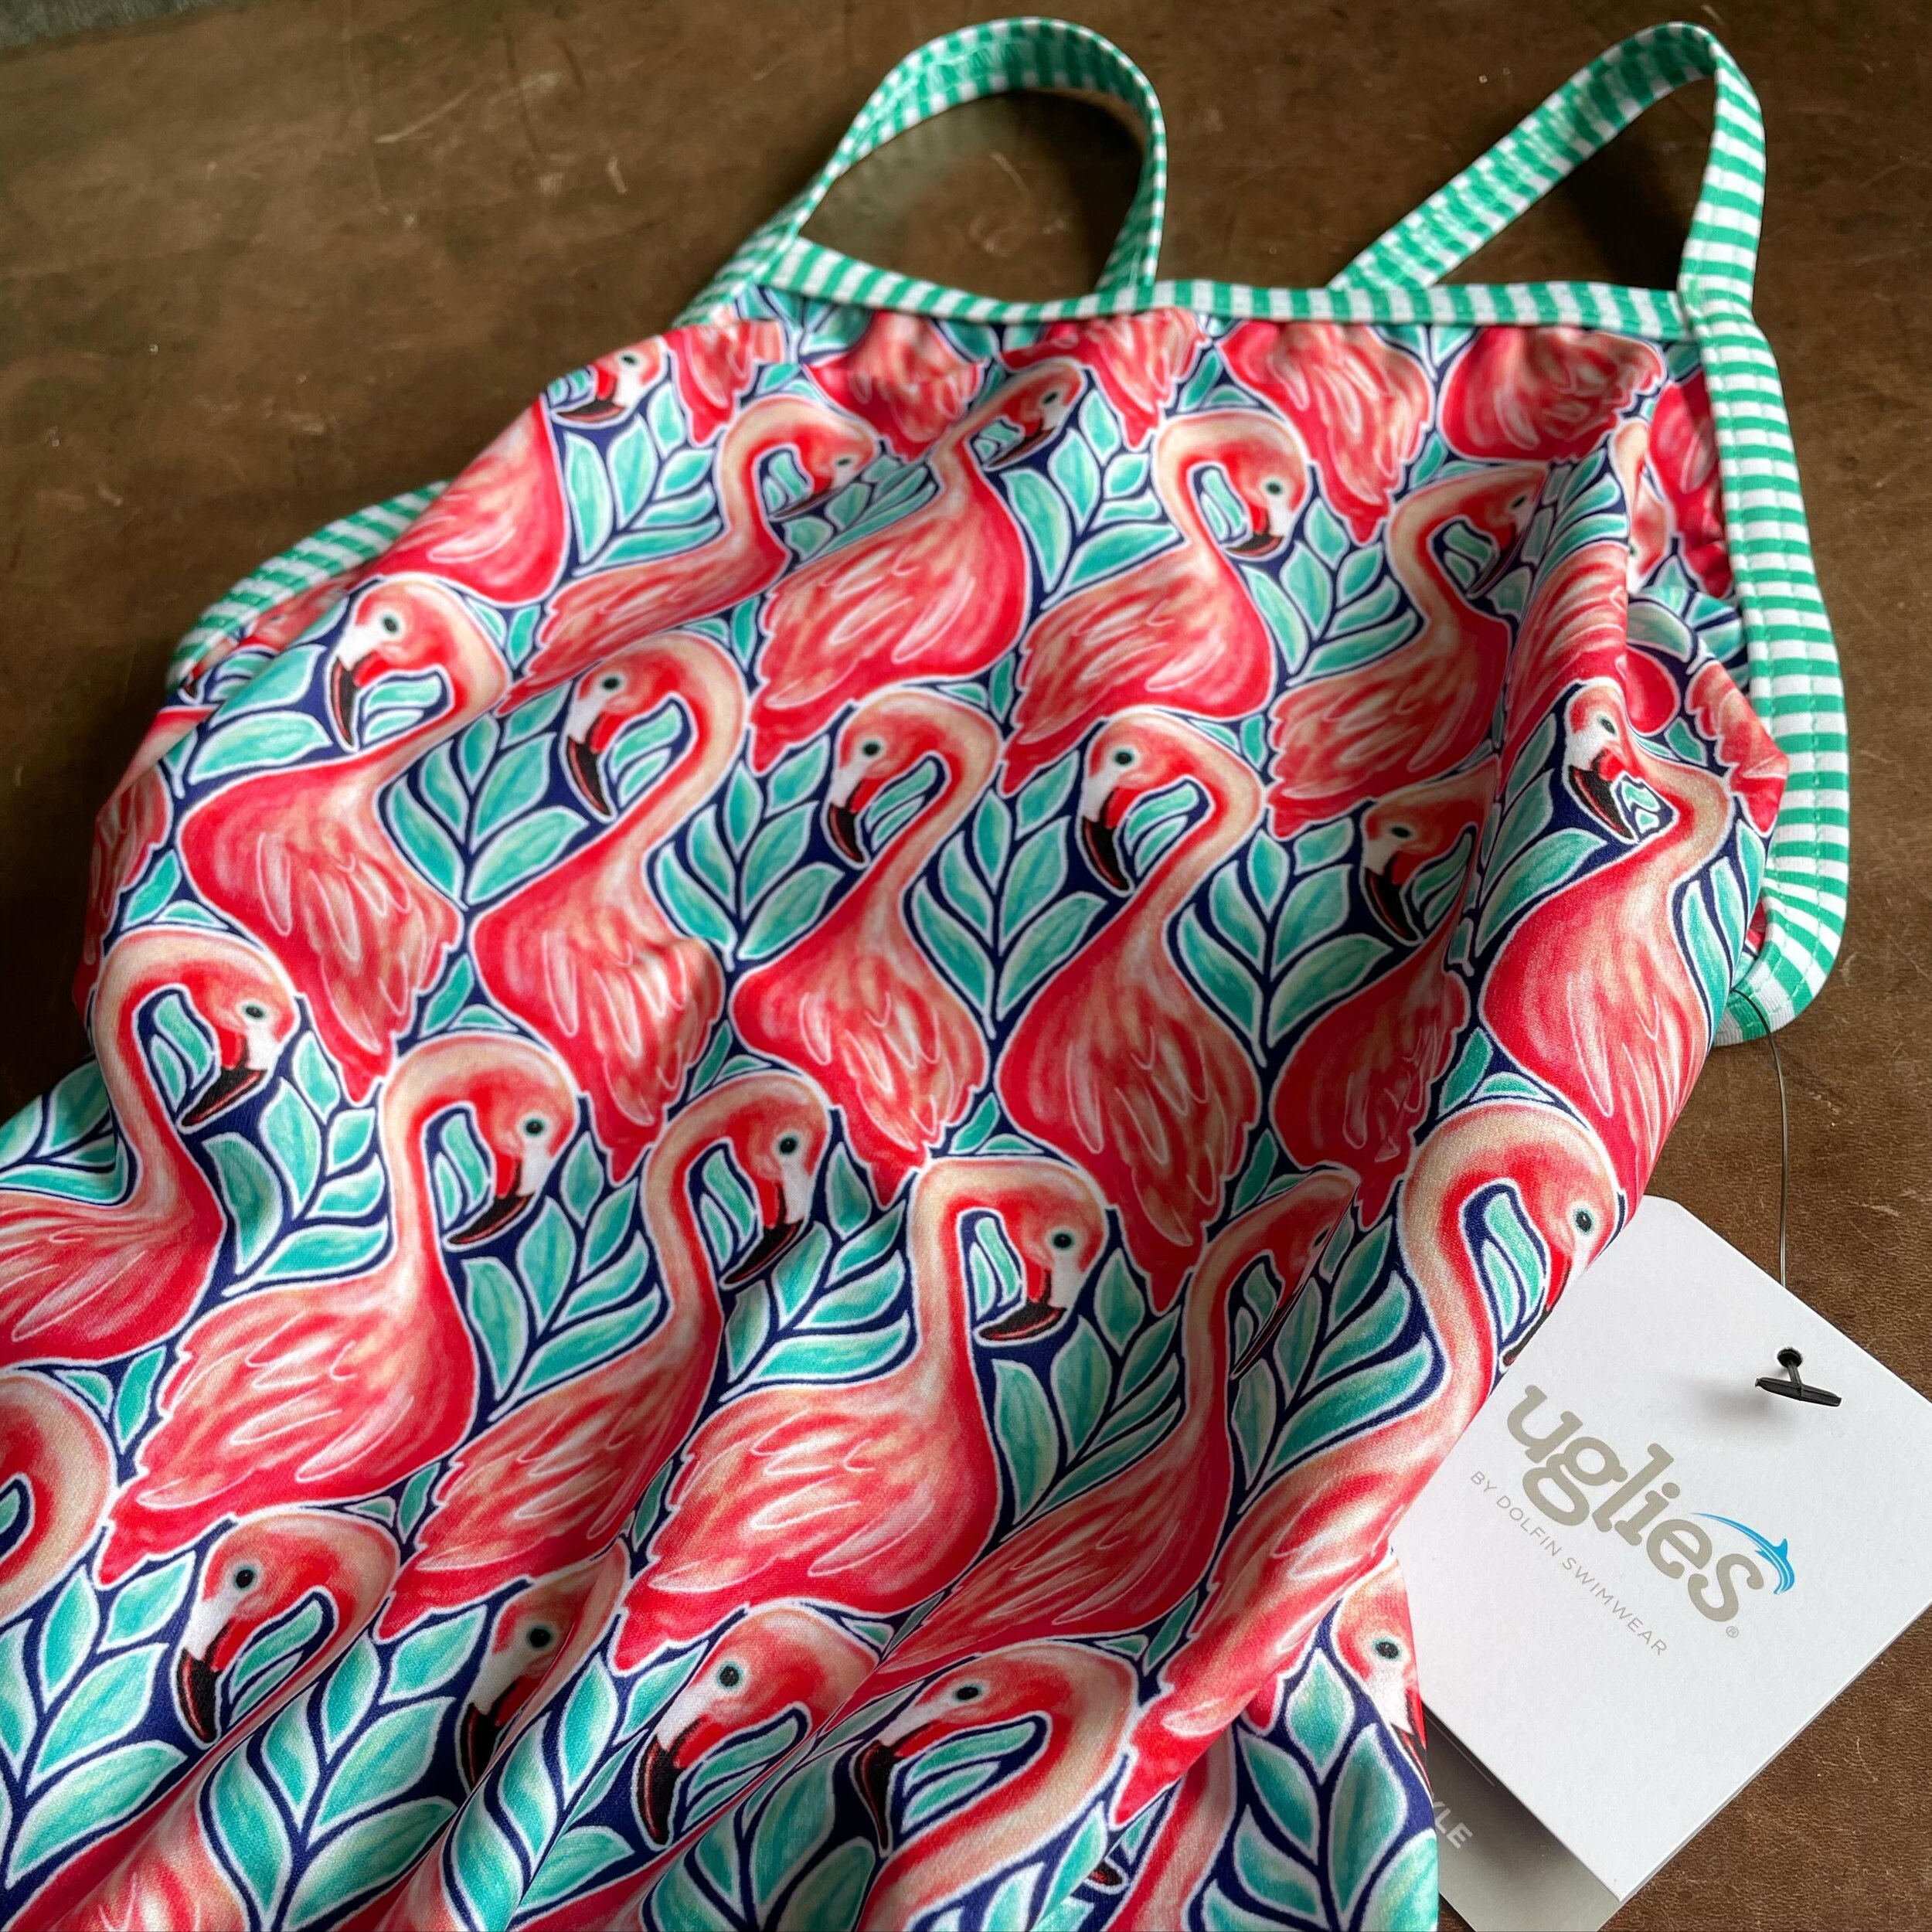 How crazy that I actually wore through a swimsuit! A non-swimmer! So excited to try out my new @dolphinswimware Uglies&hellip; it&rsquo;s time to go loud 😍